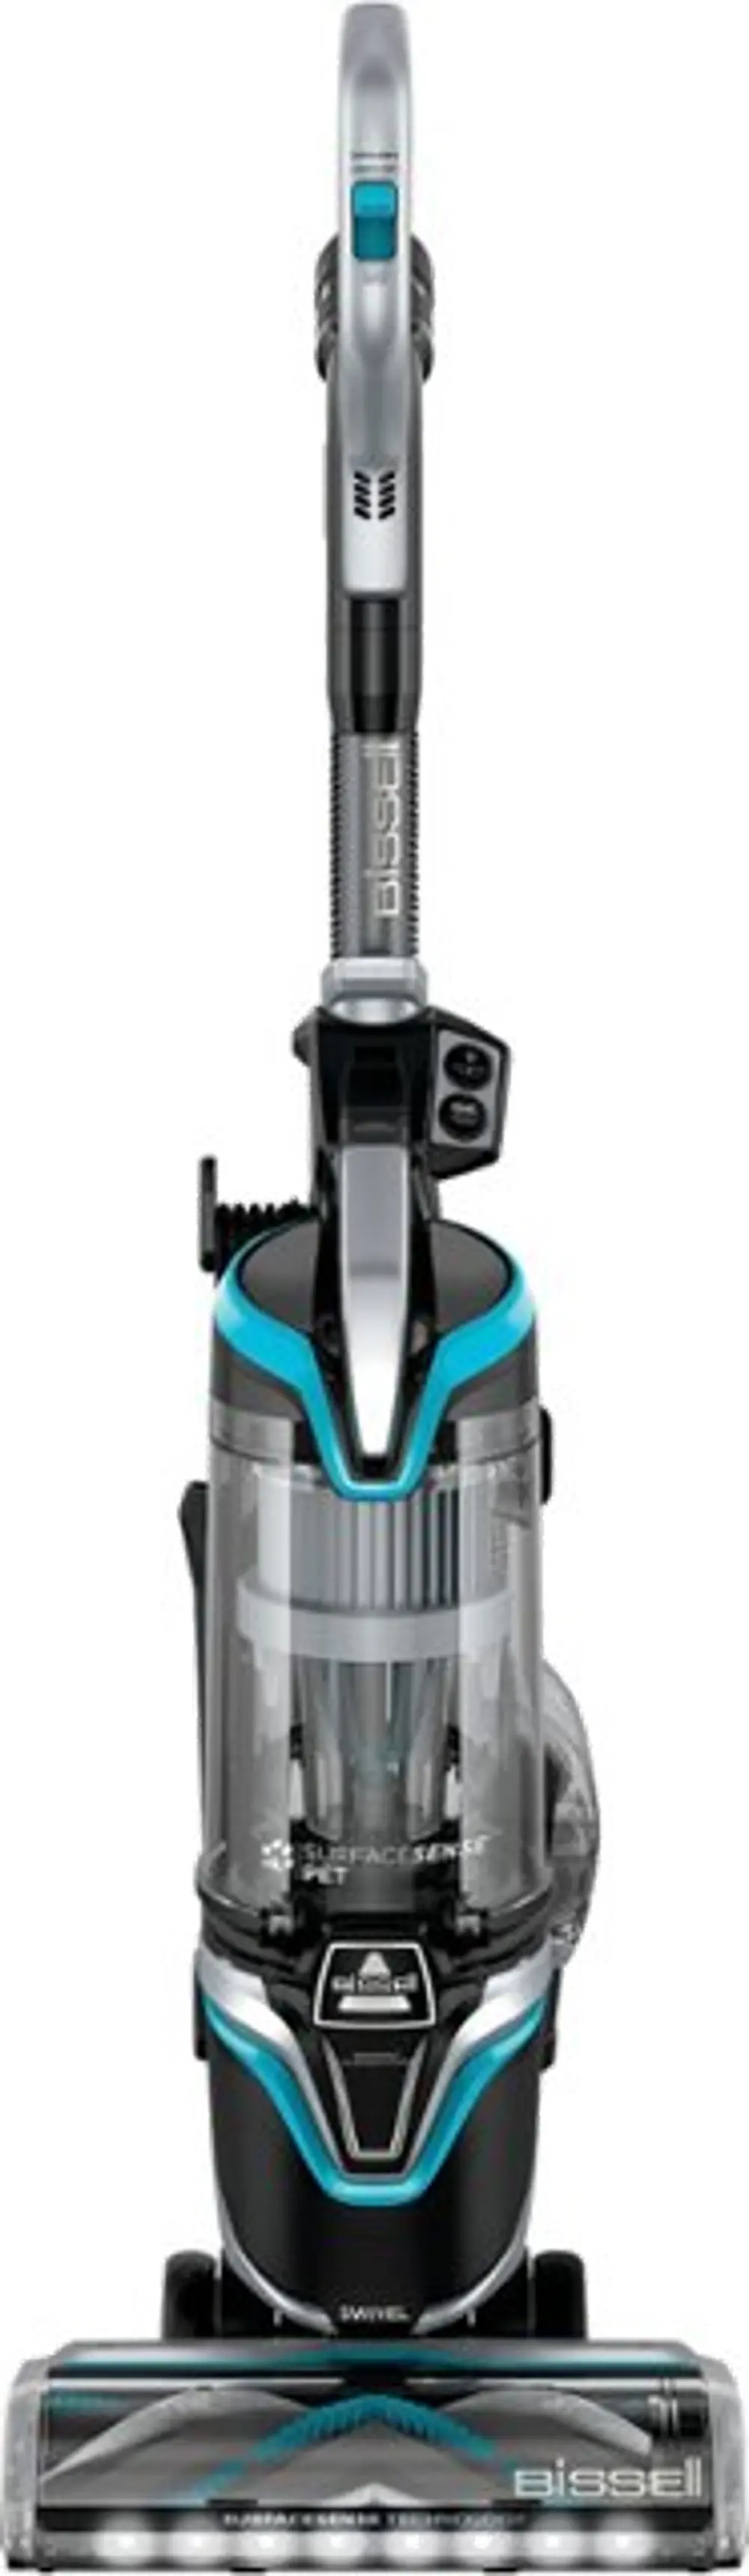 2817 Bissell SurfaceSense Pet Upright Vacuum-1